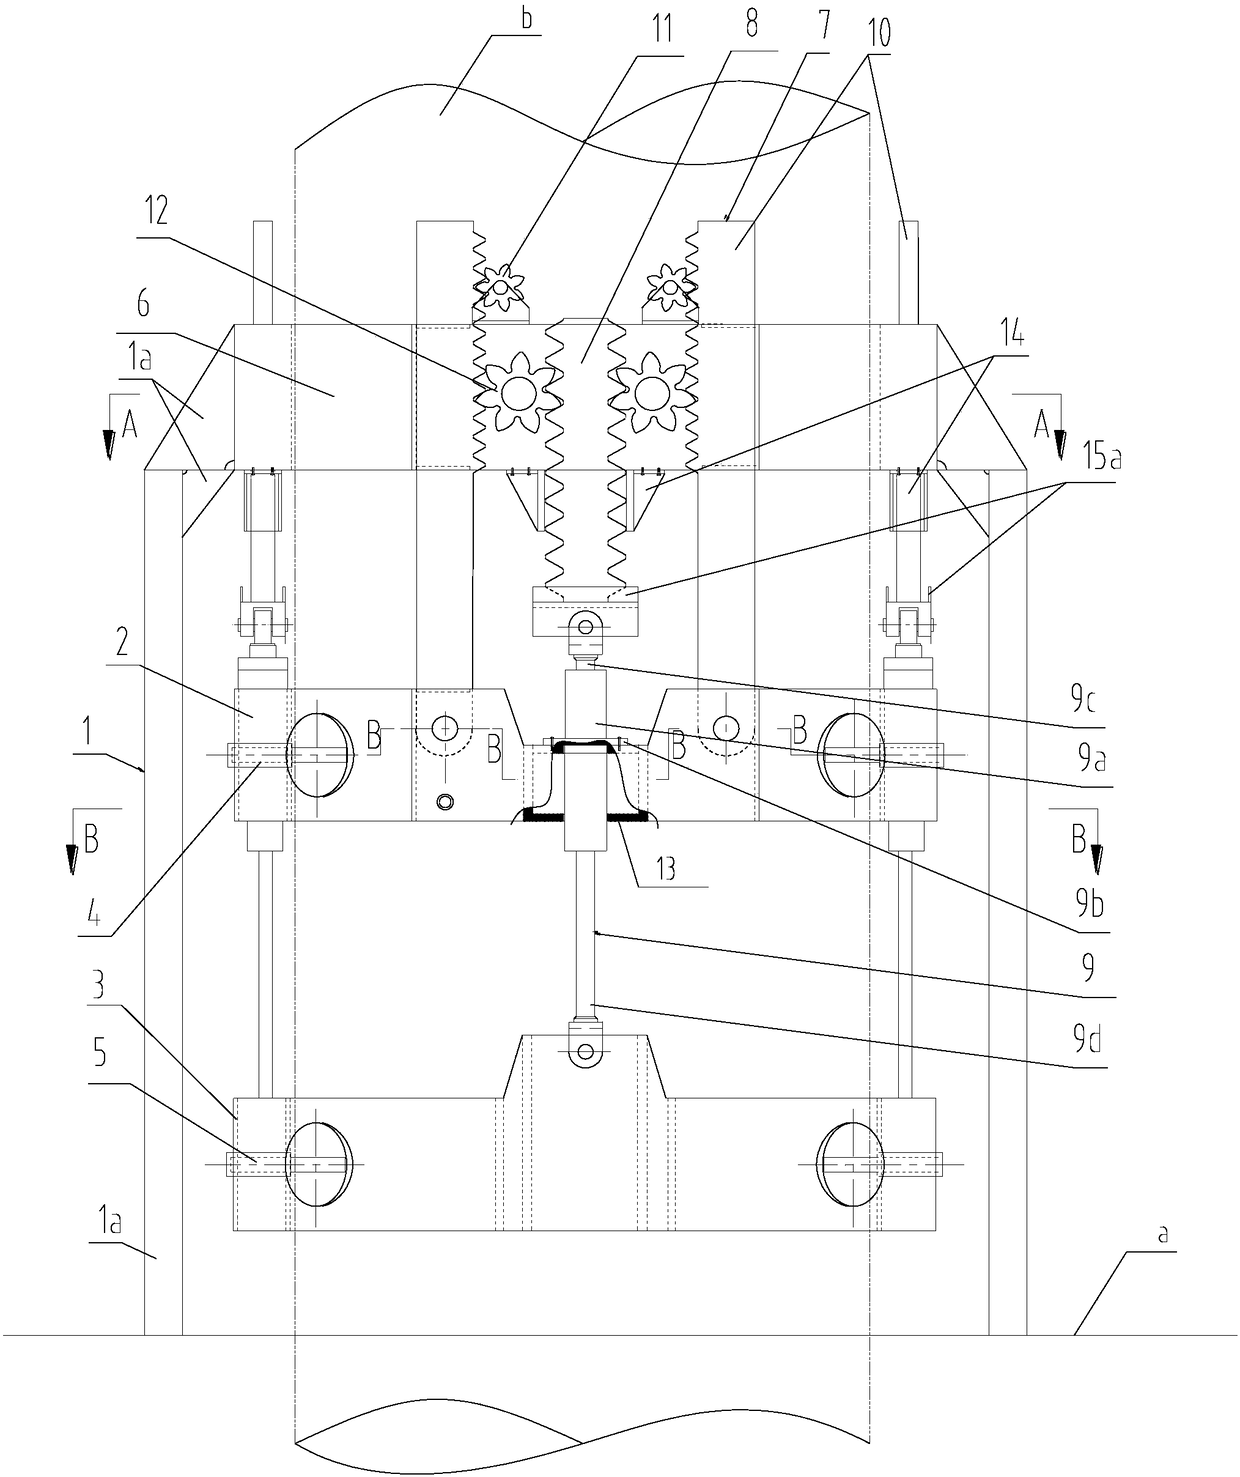 Hydraulic inserted pin lifting device